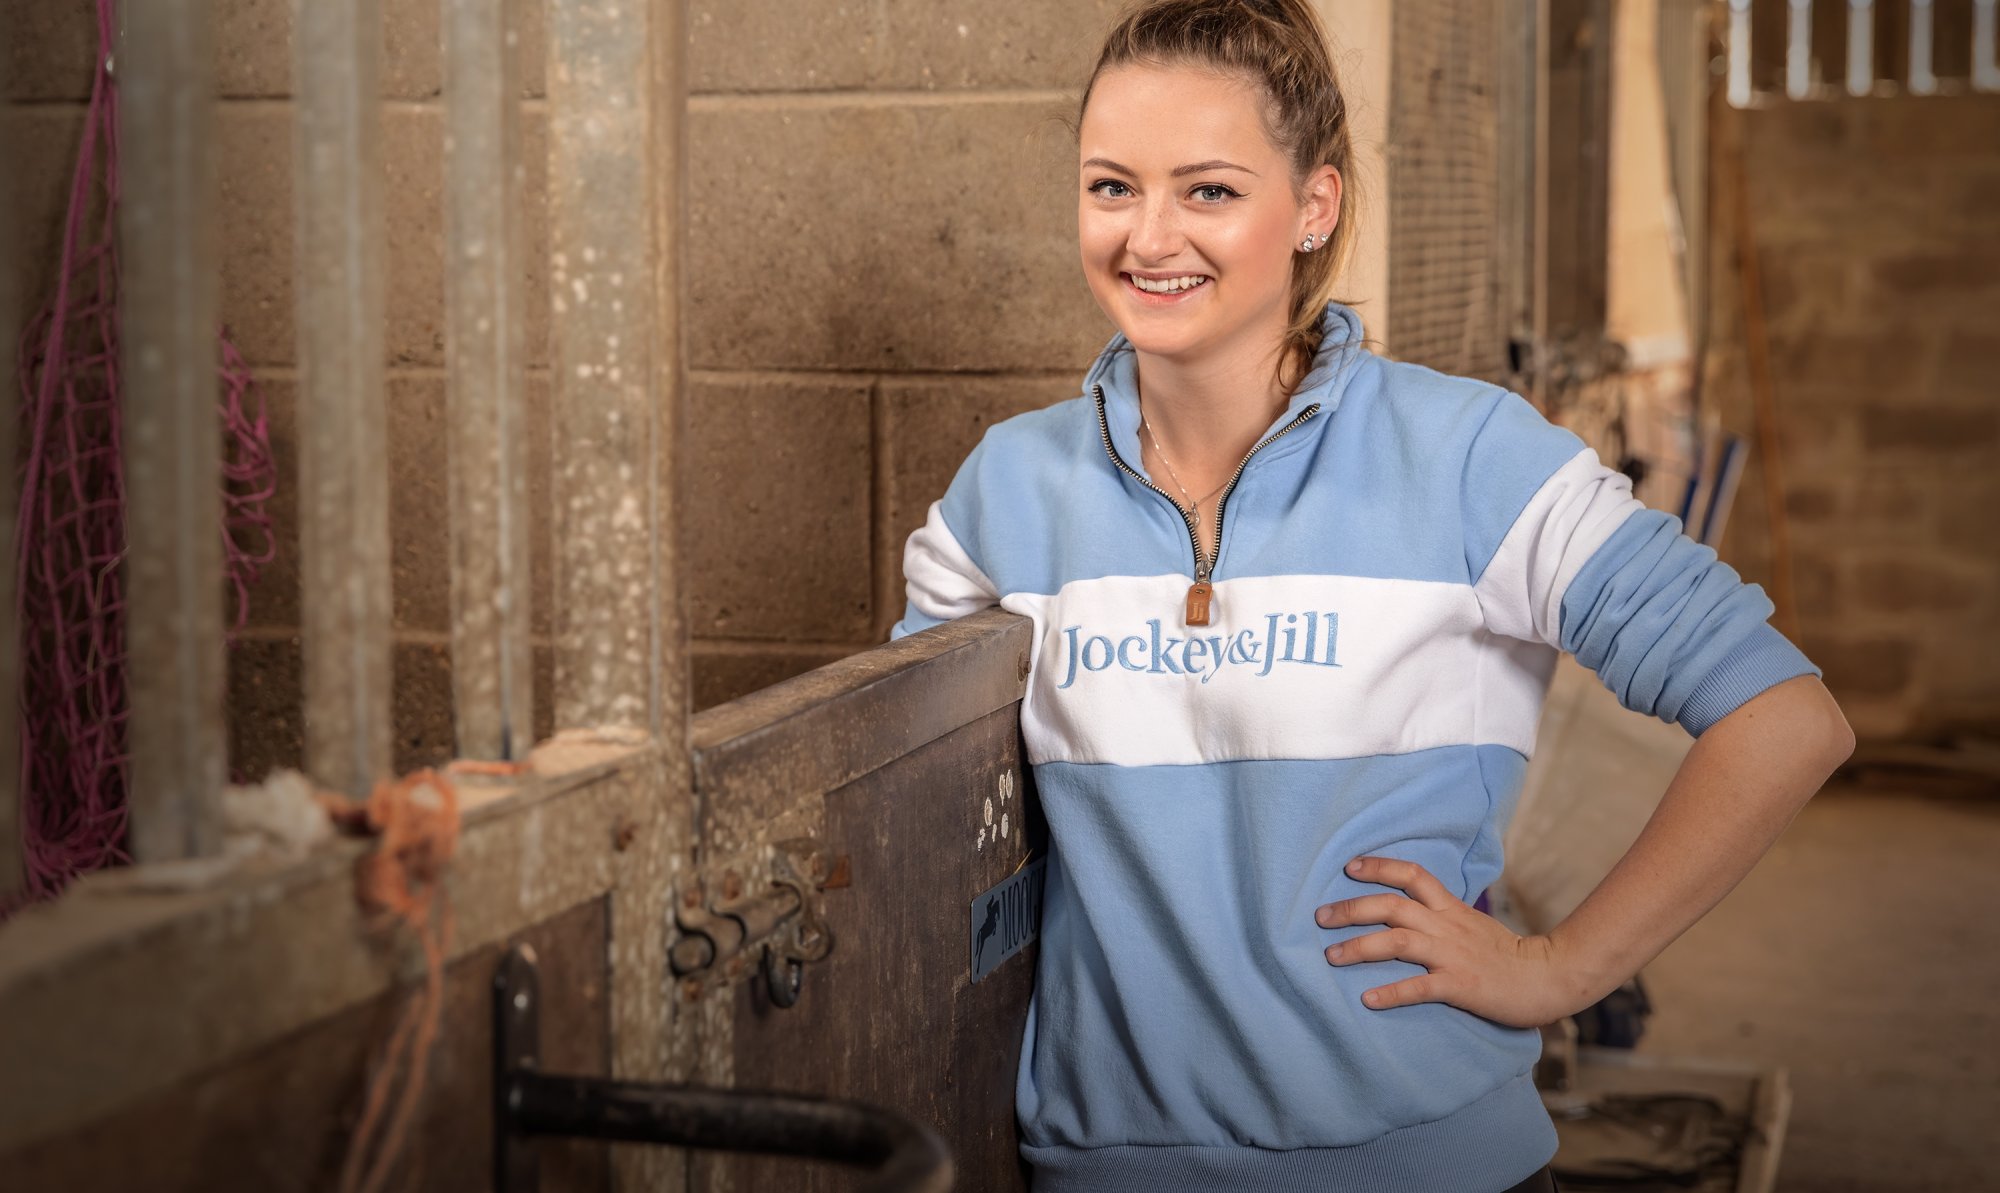 Welcome to the home of Norfolk Equestrian Clothing - Jockey and Jill